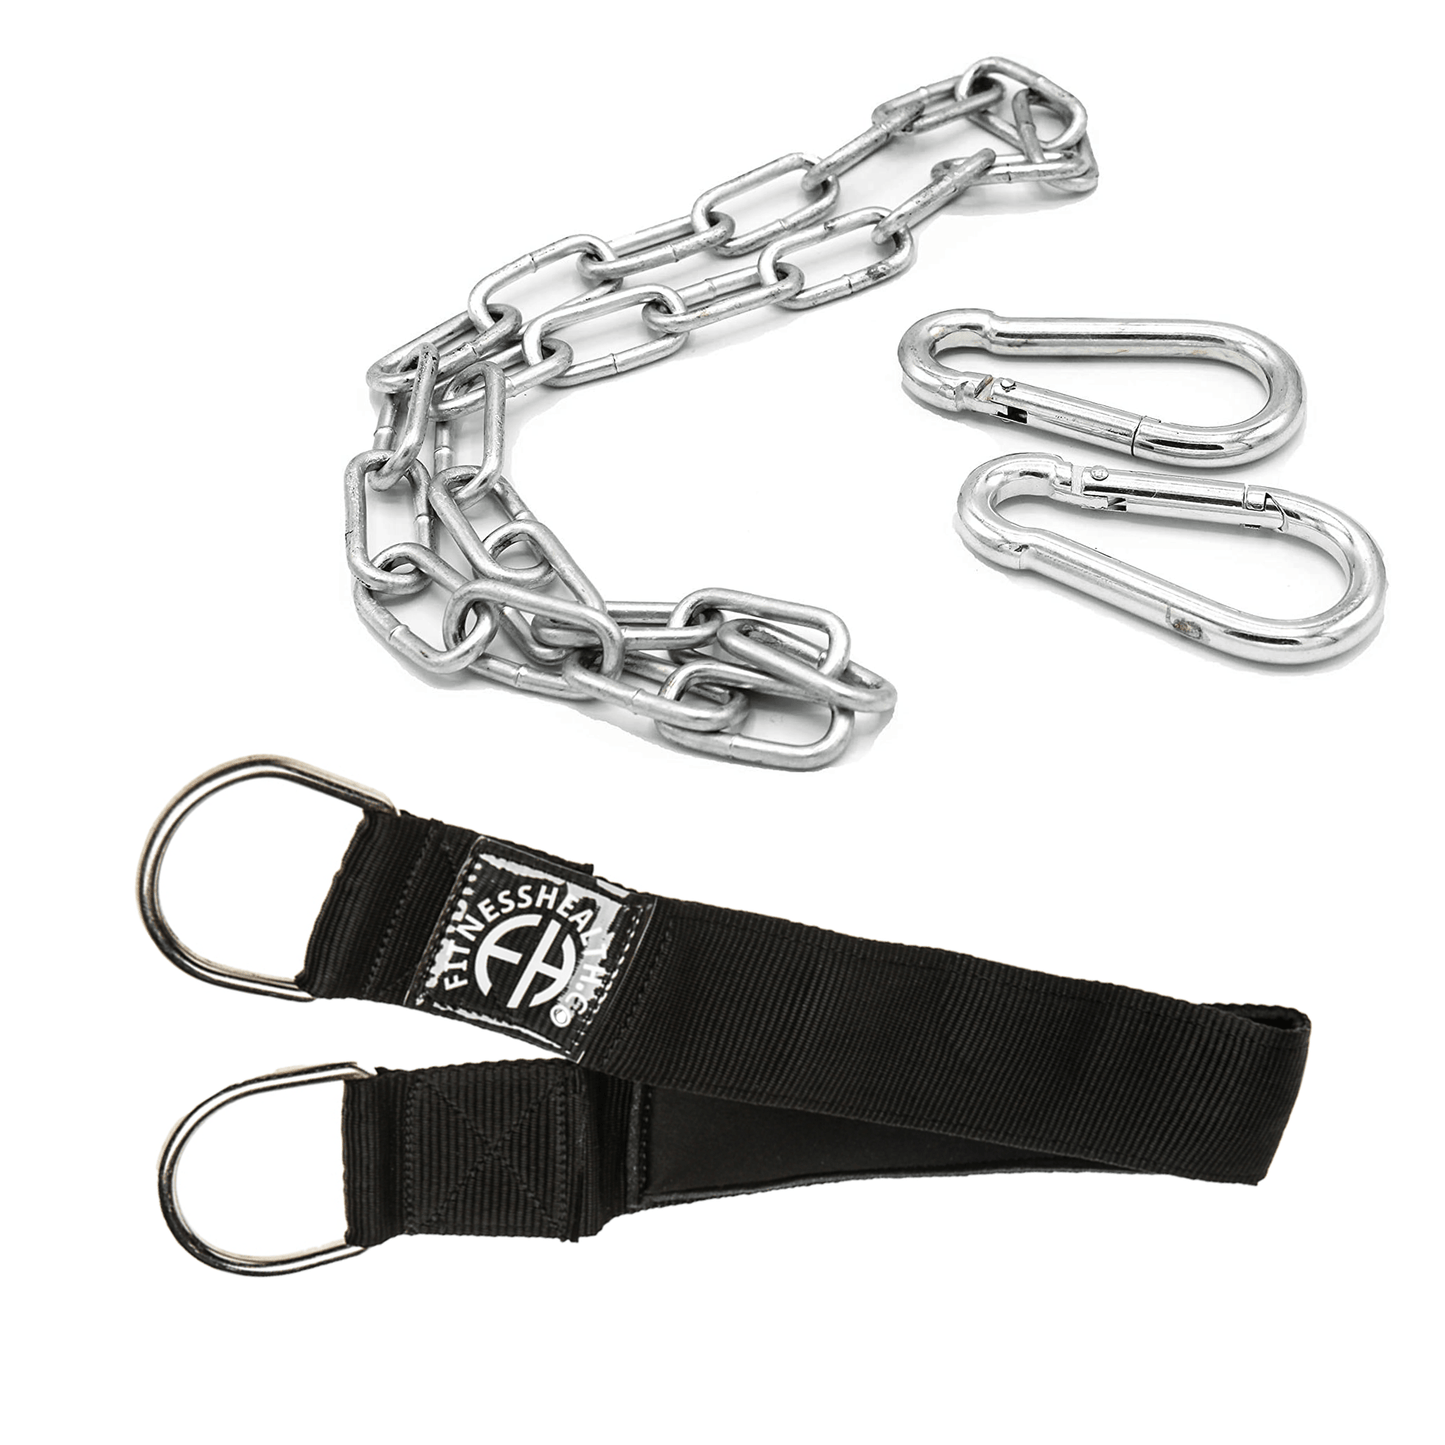 Gym Fitness Cable Attachment Tricep Rope Dip Chain Set (Pack of 5) - Fitness Health 